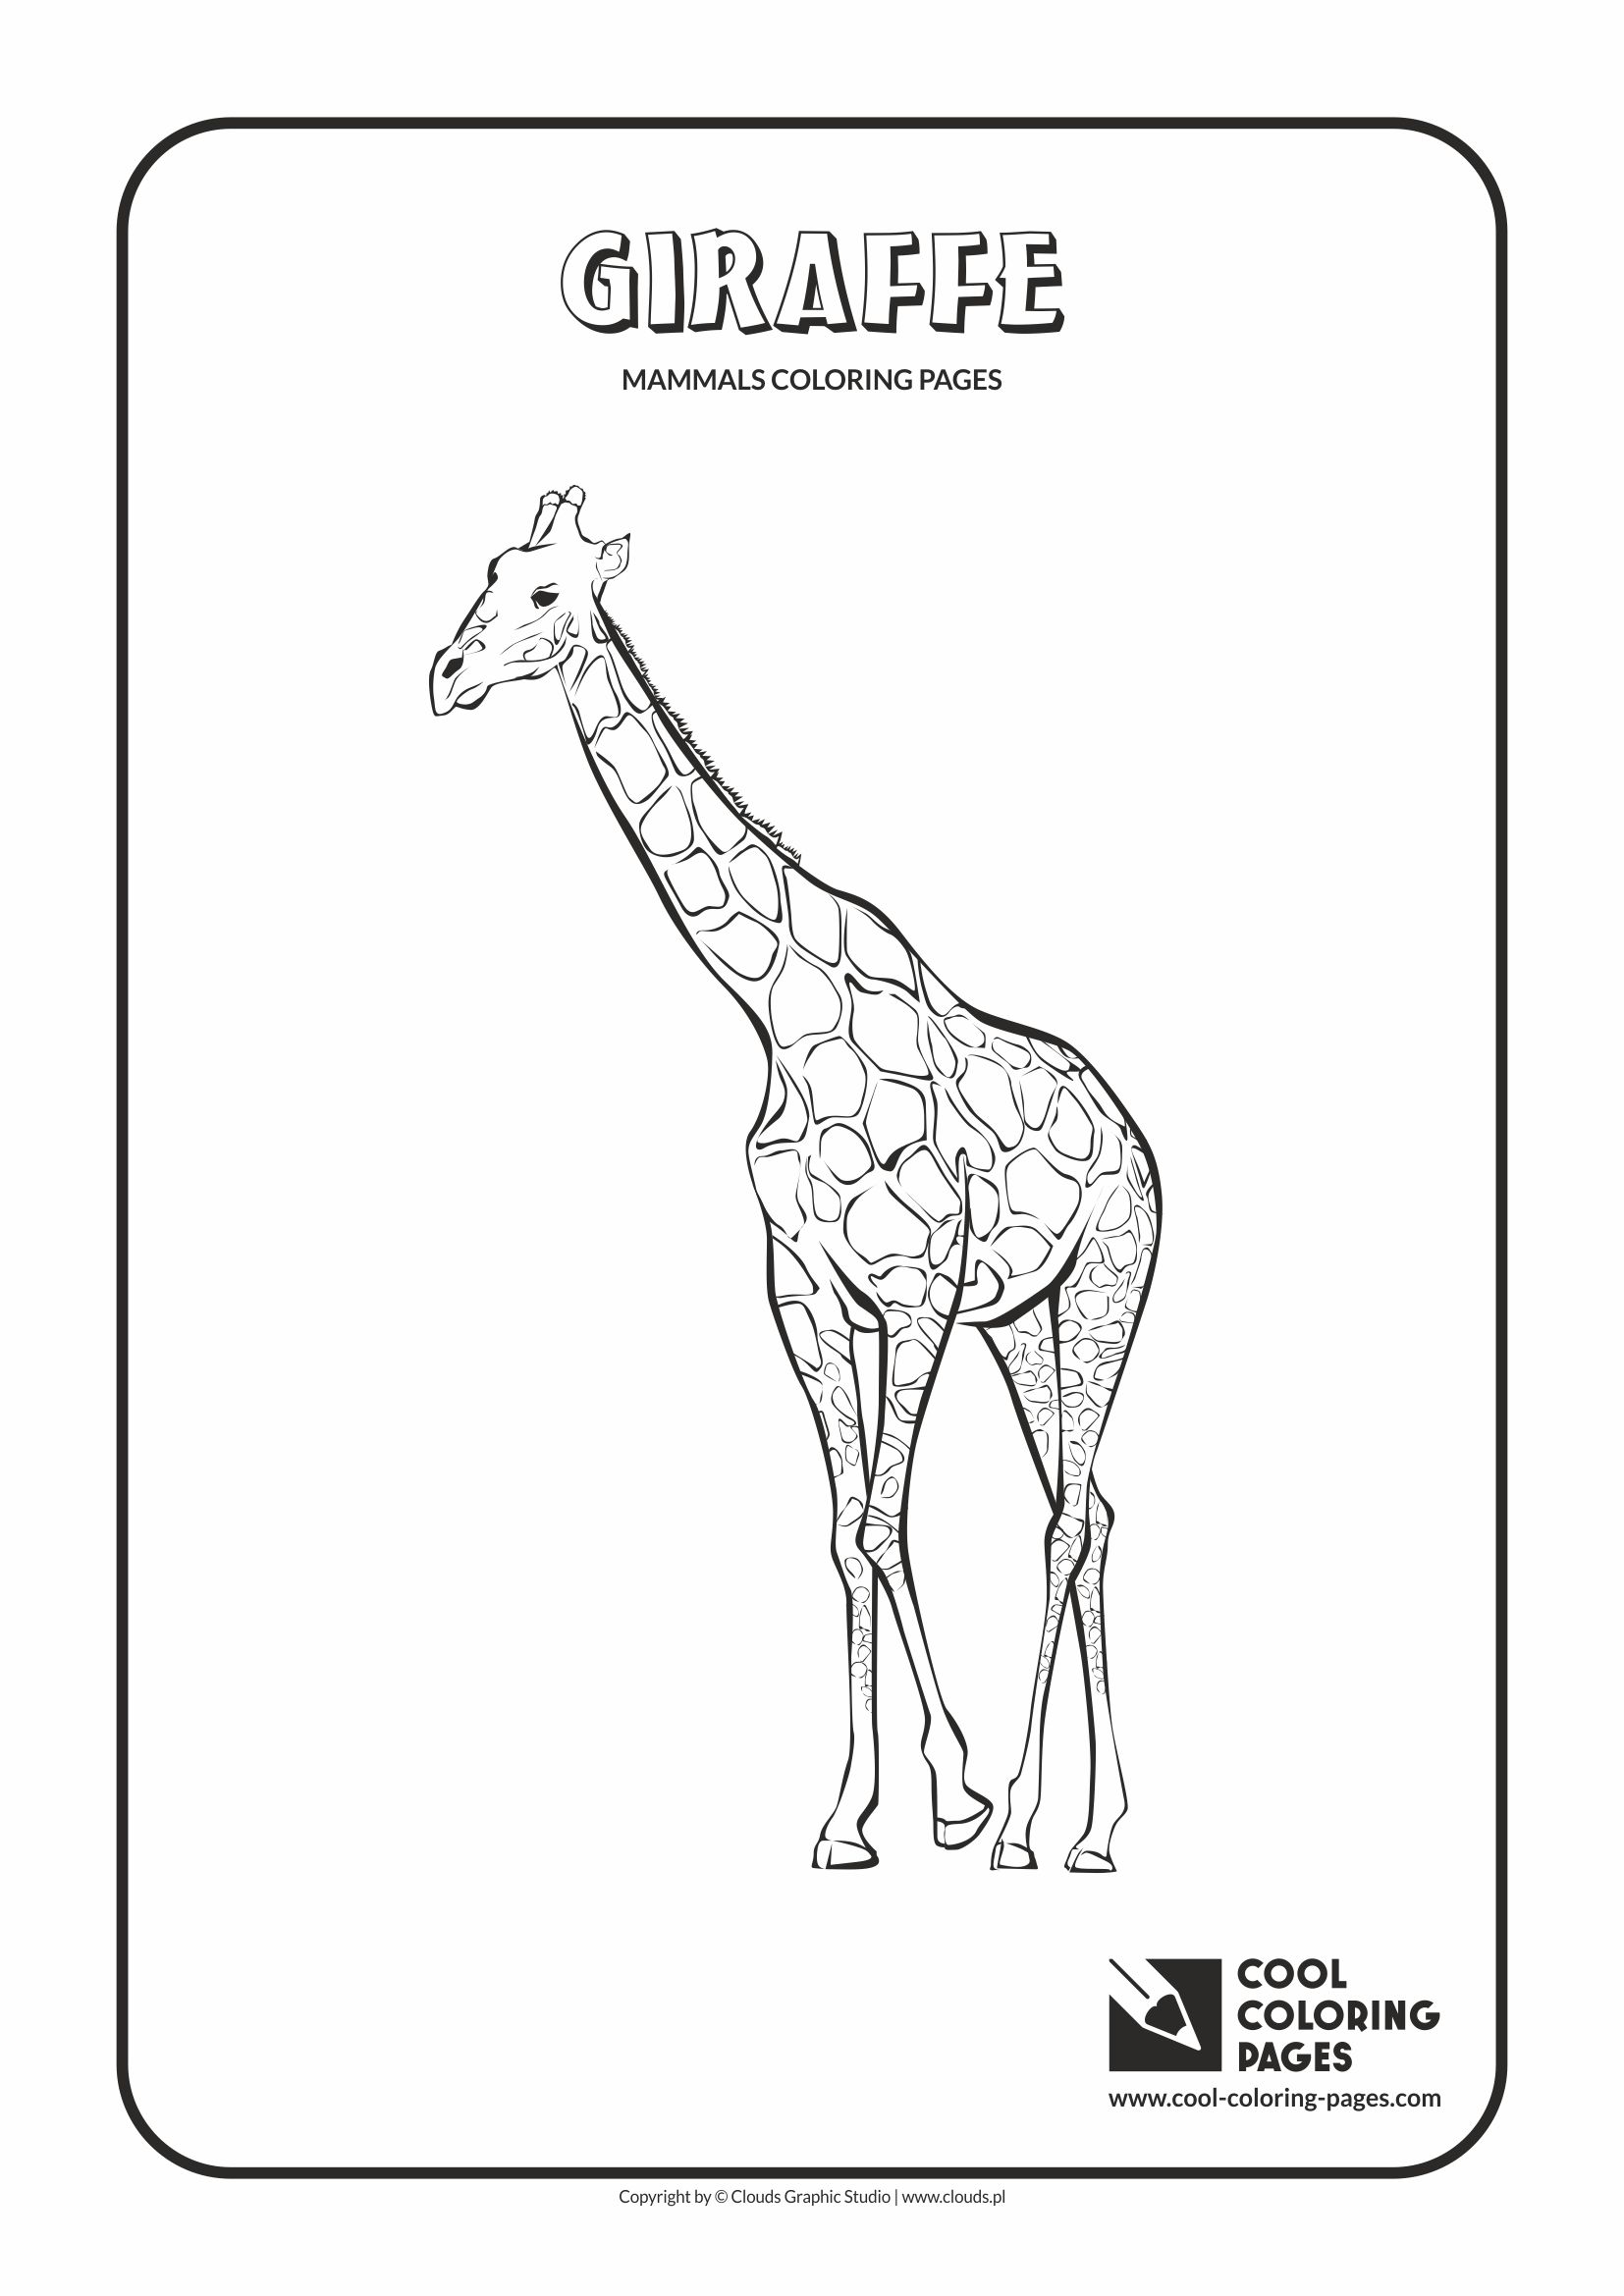 Cool Coloring Pages - Animals / Giraffe / Coloring page with giraffe